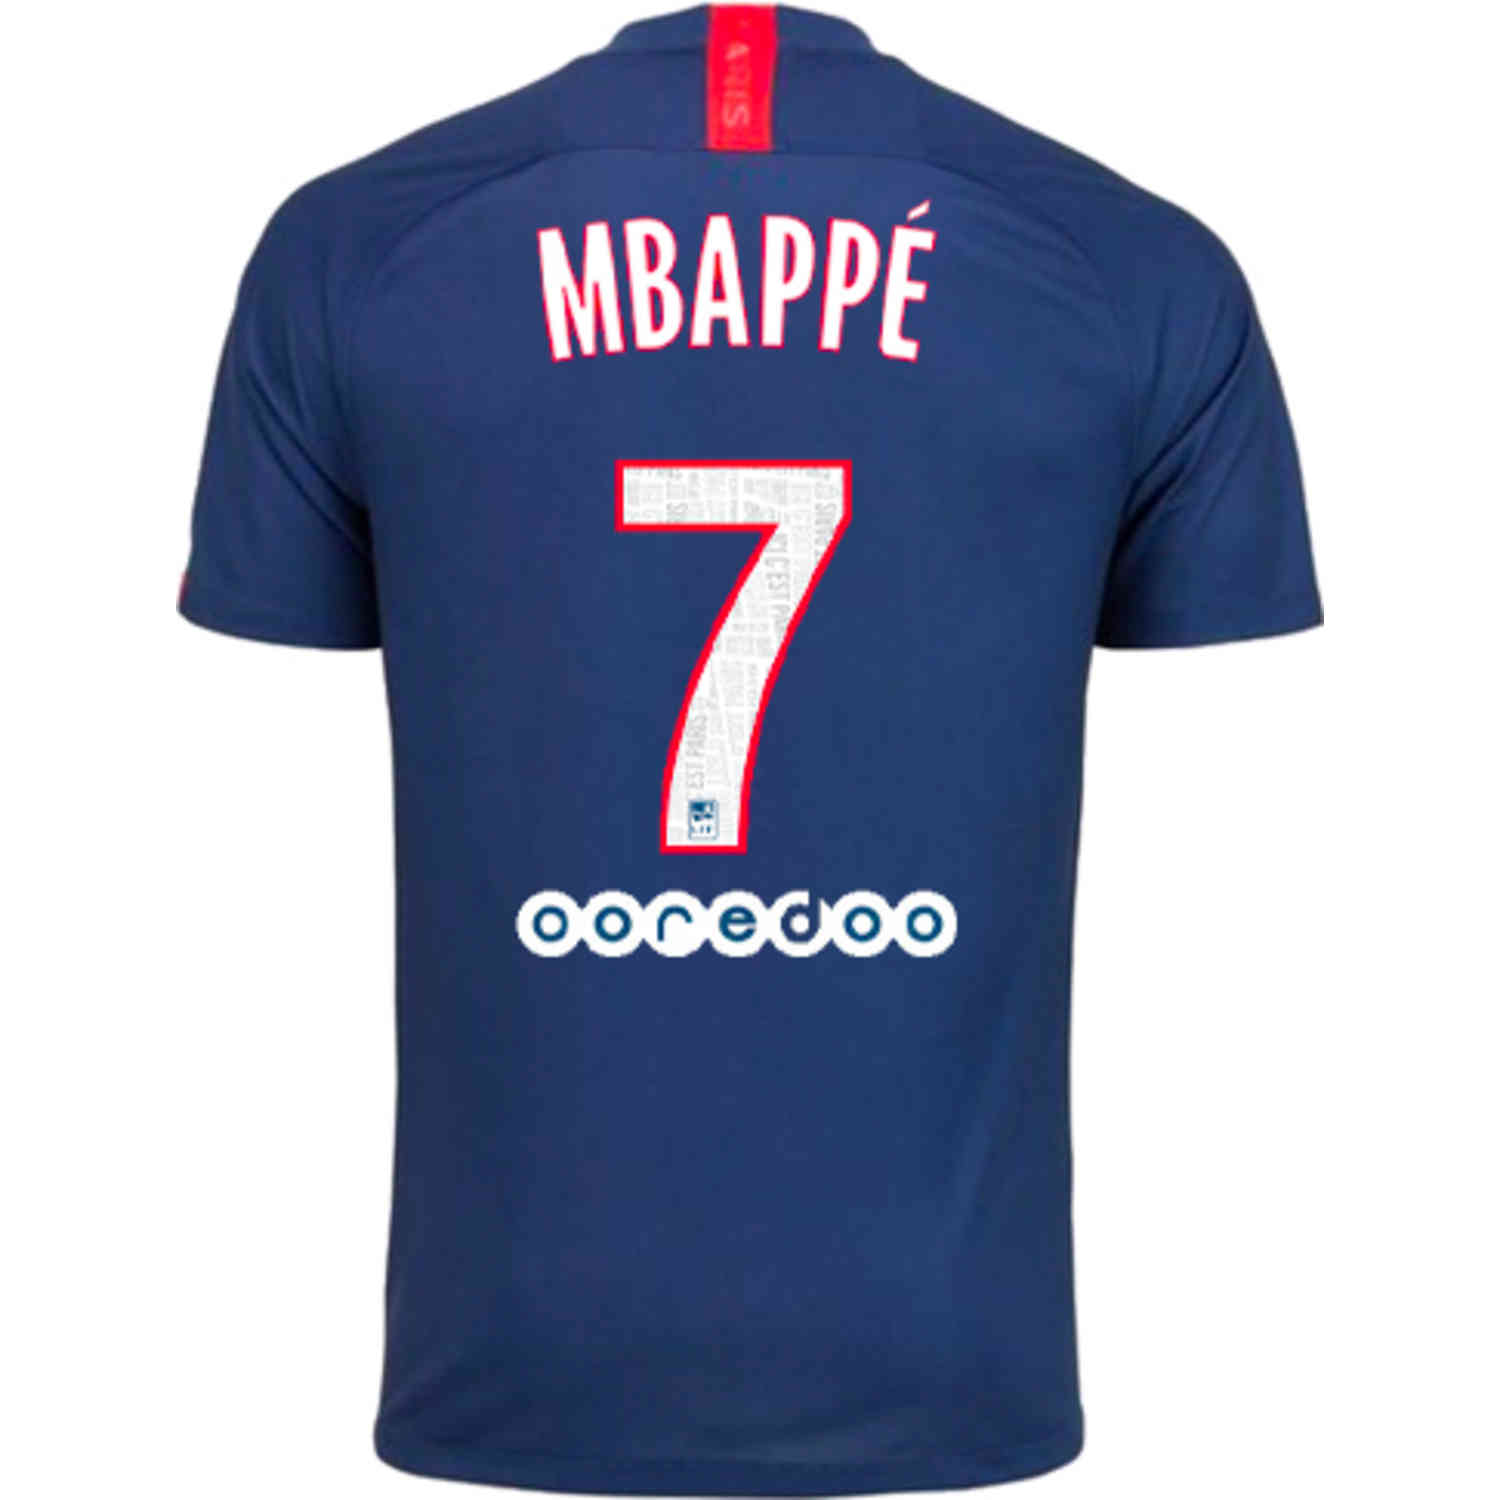 mbappe jersey youth